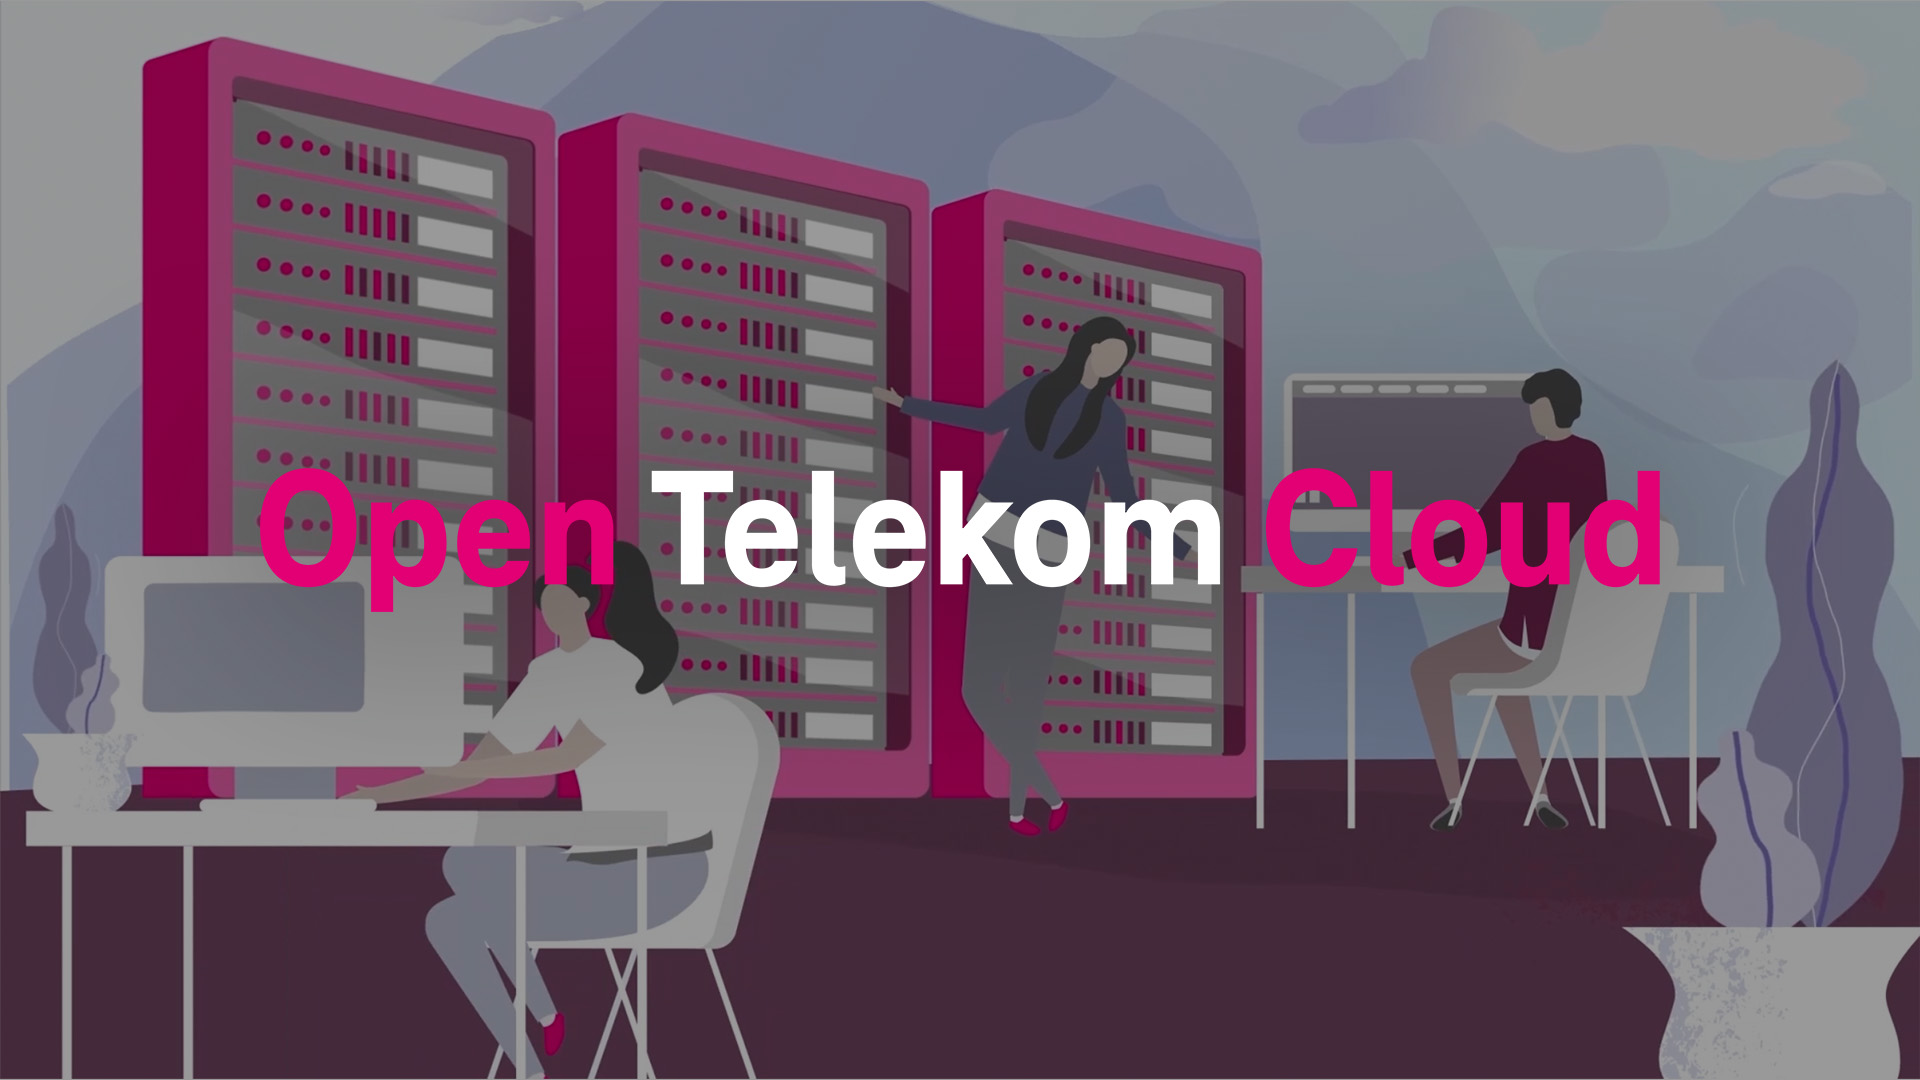 Open Telekom Cloud | New location Amsterdam | T-Systems